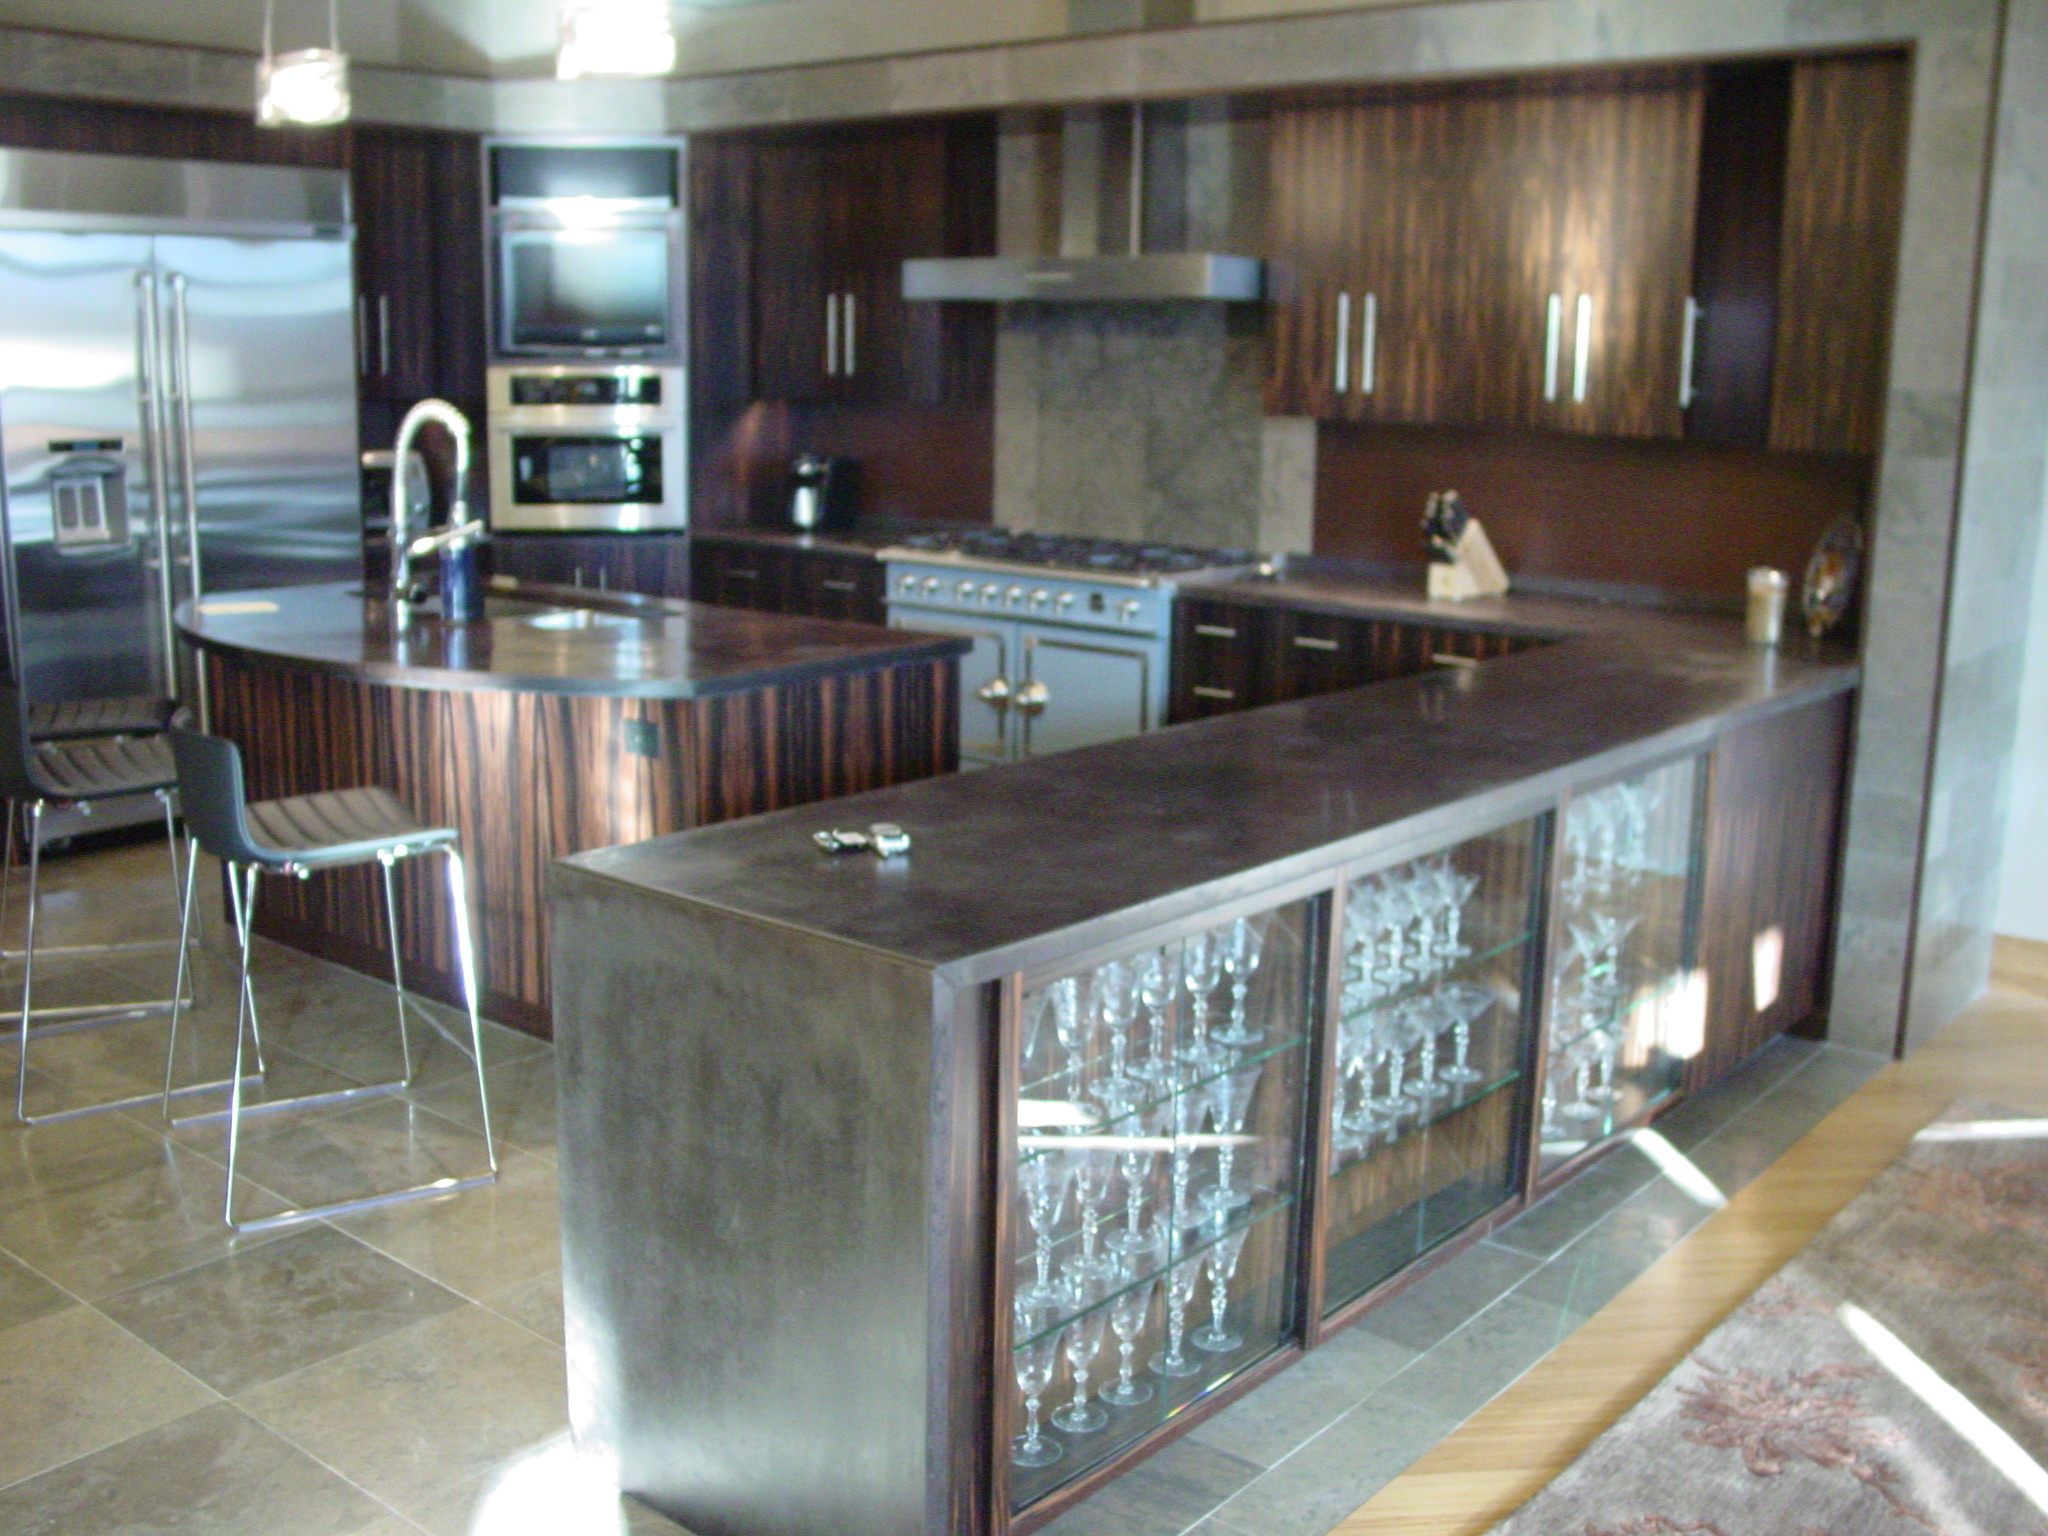 Black concrete countertops with exotic wood cabinets, stainless steel appliances